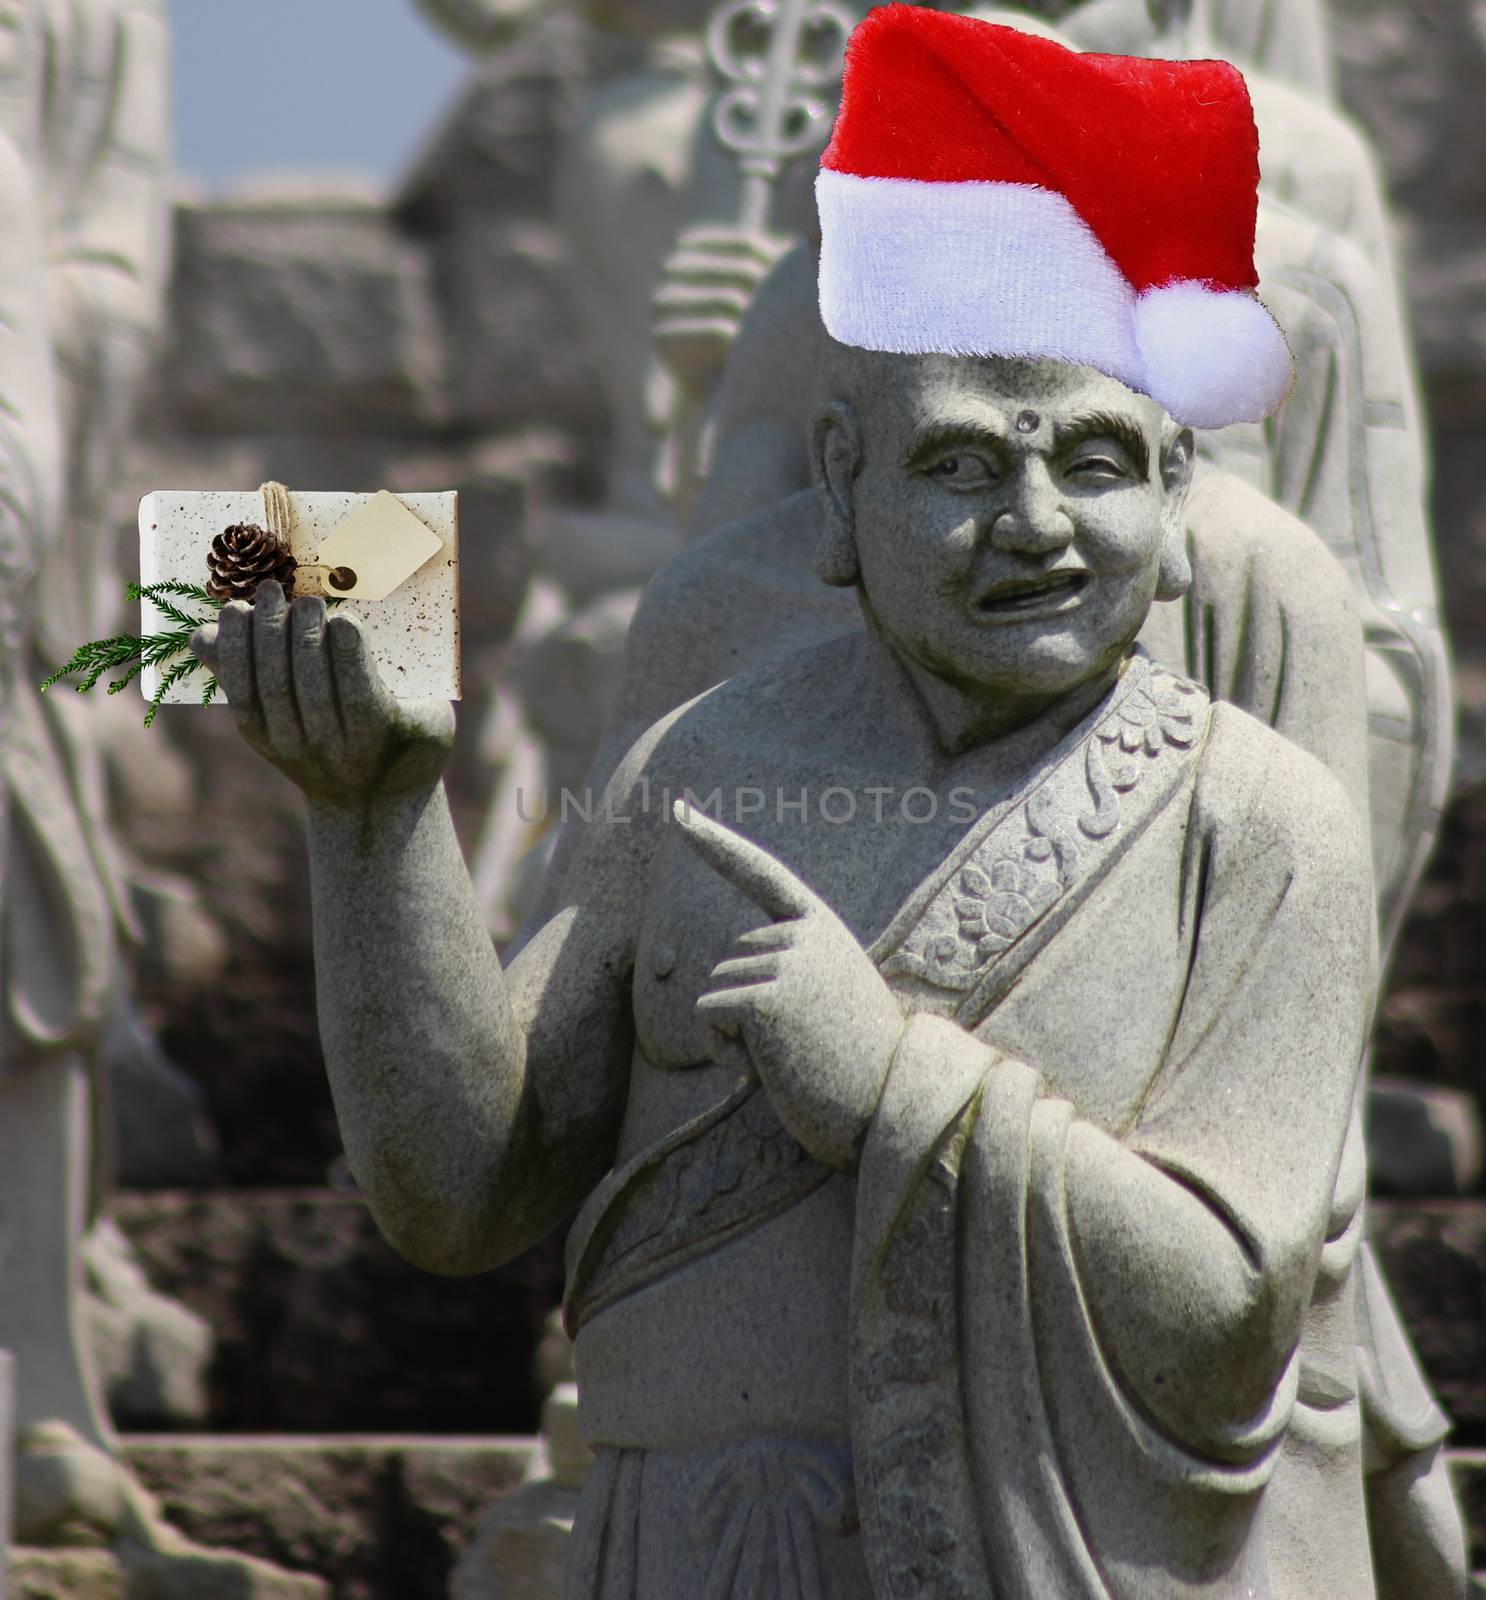 Christmas stone buddhist monk statue pointing at the gift with blank card he is holding and wearing a red santa claus hat by charlottebleijenberg